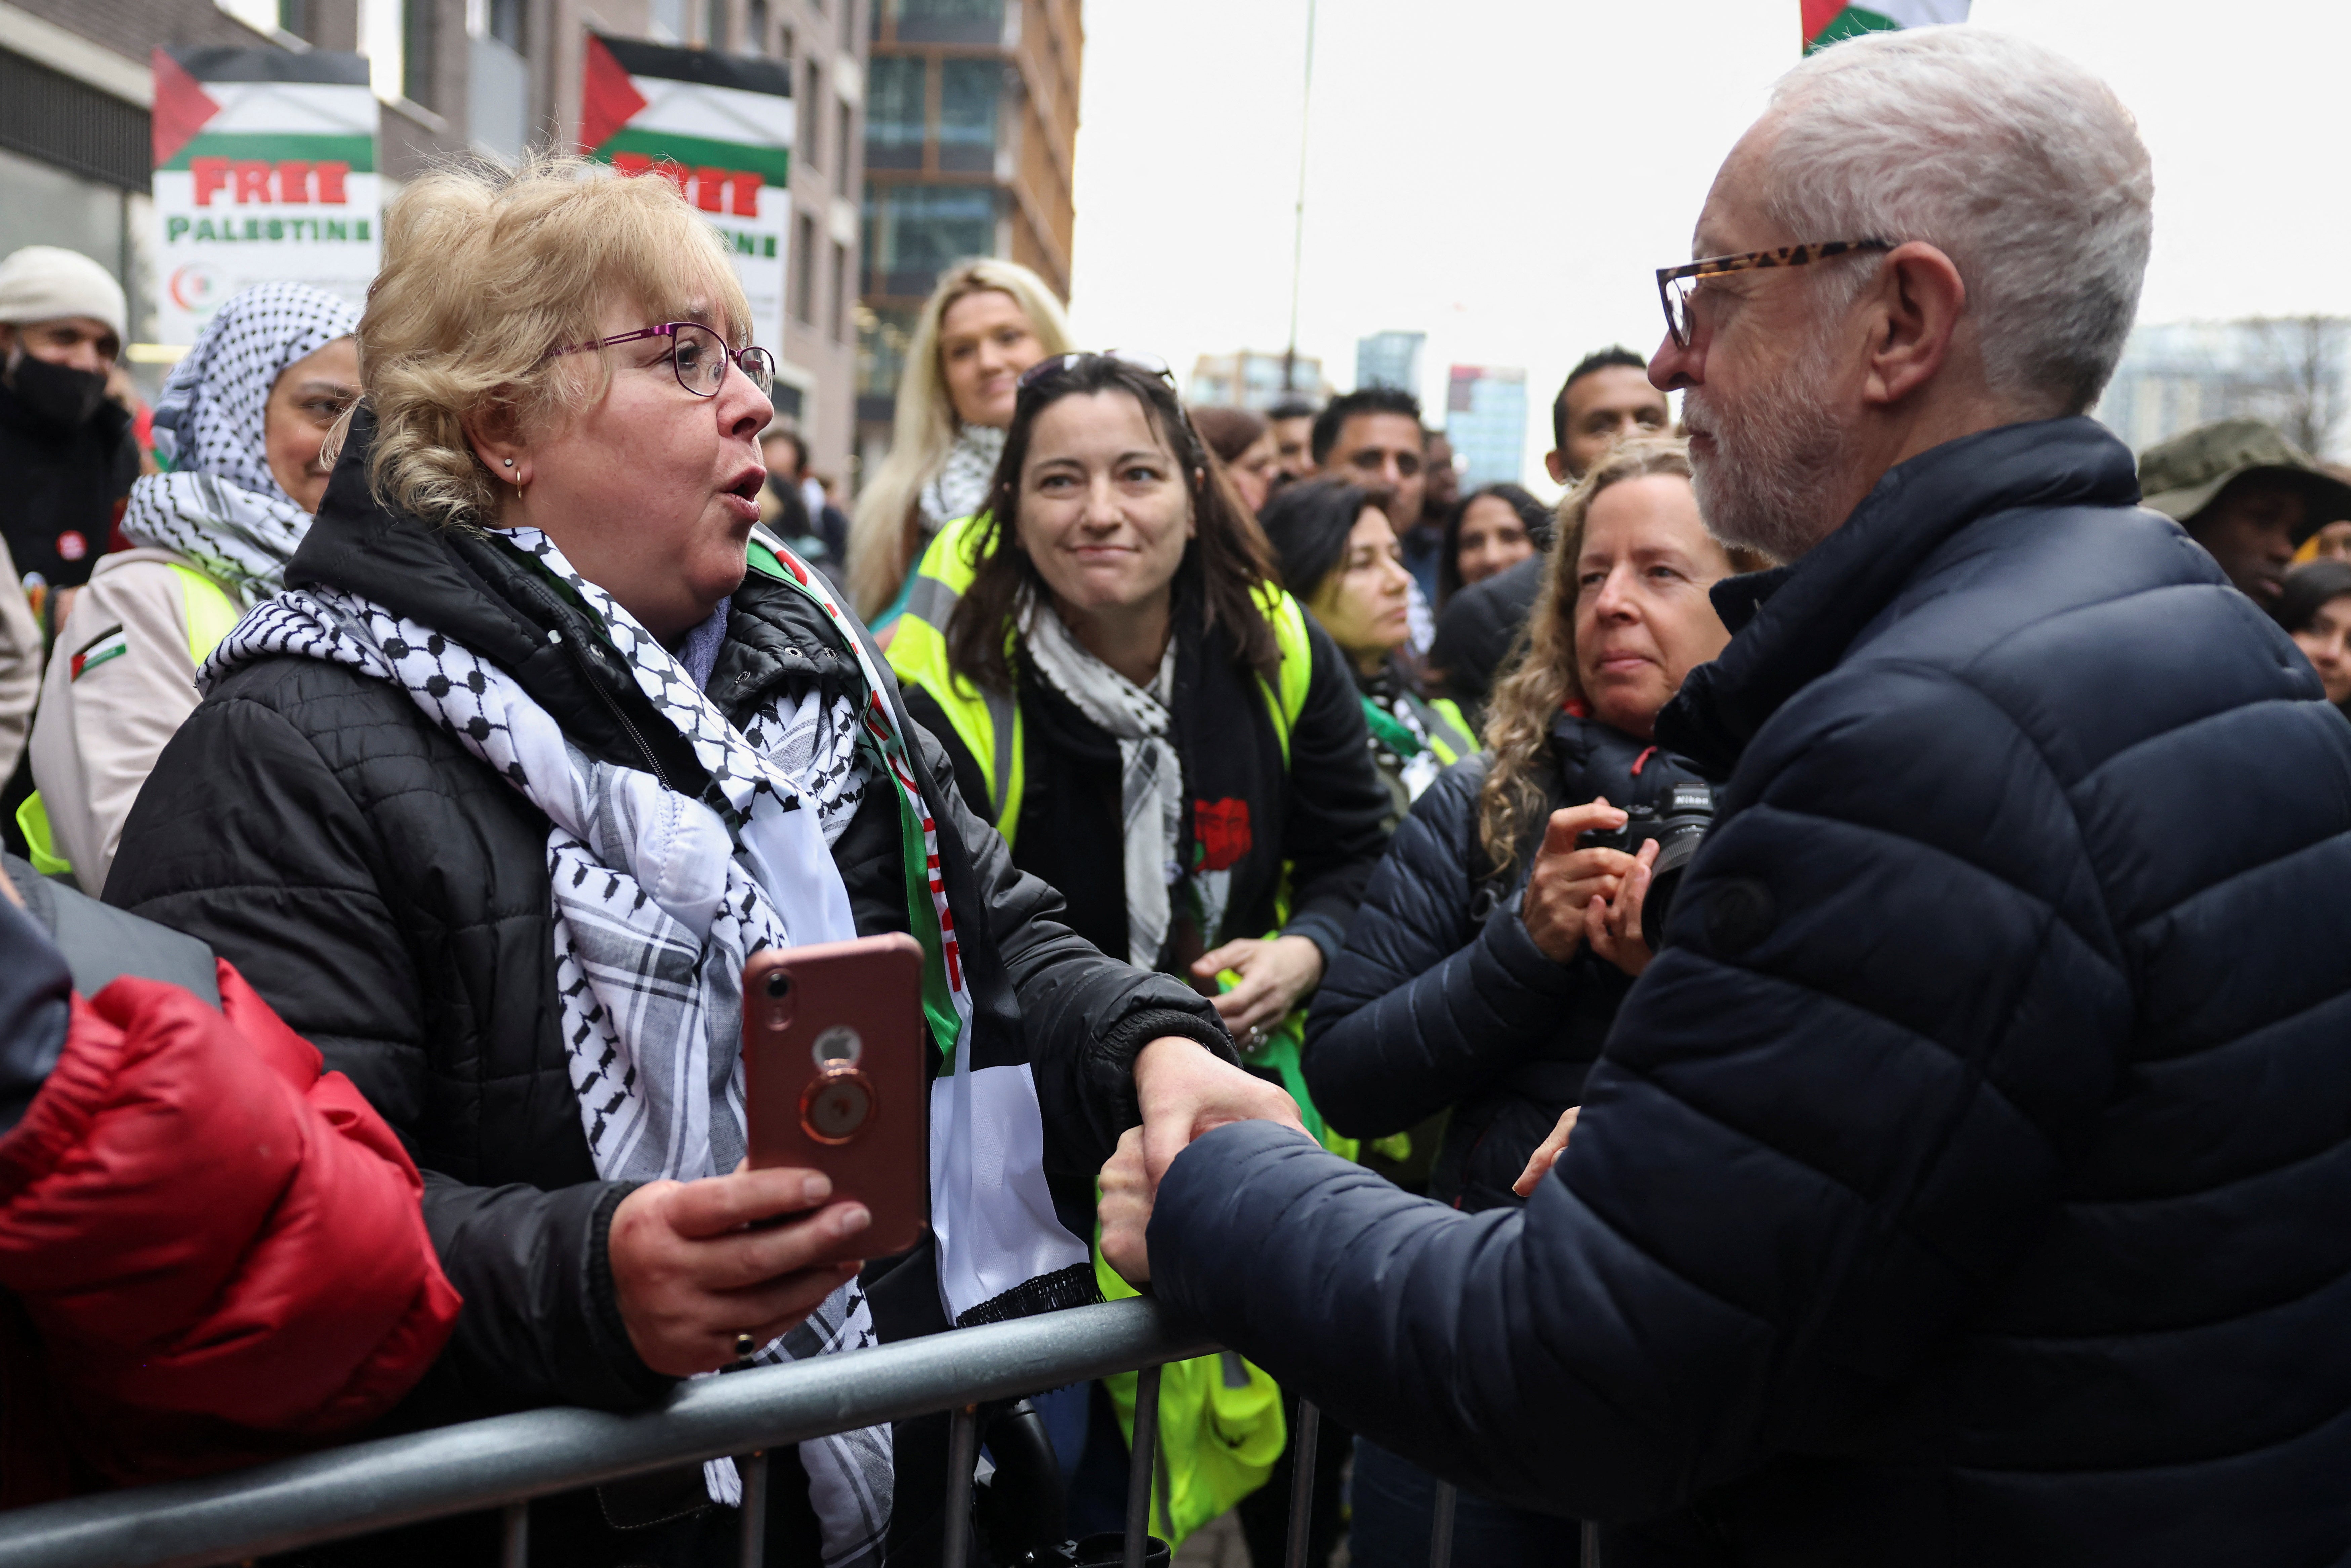 Former Labour leader Jeremy Corbyn greets a demonstrator, as they attend a pro-Palestinian protest